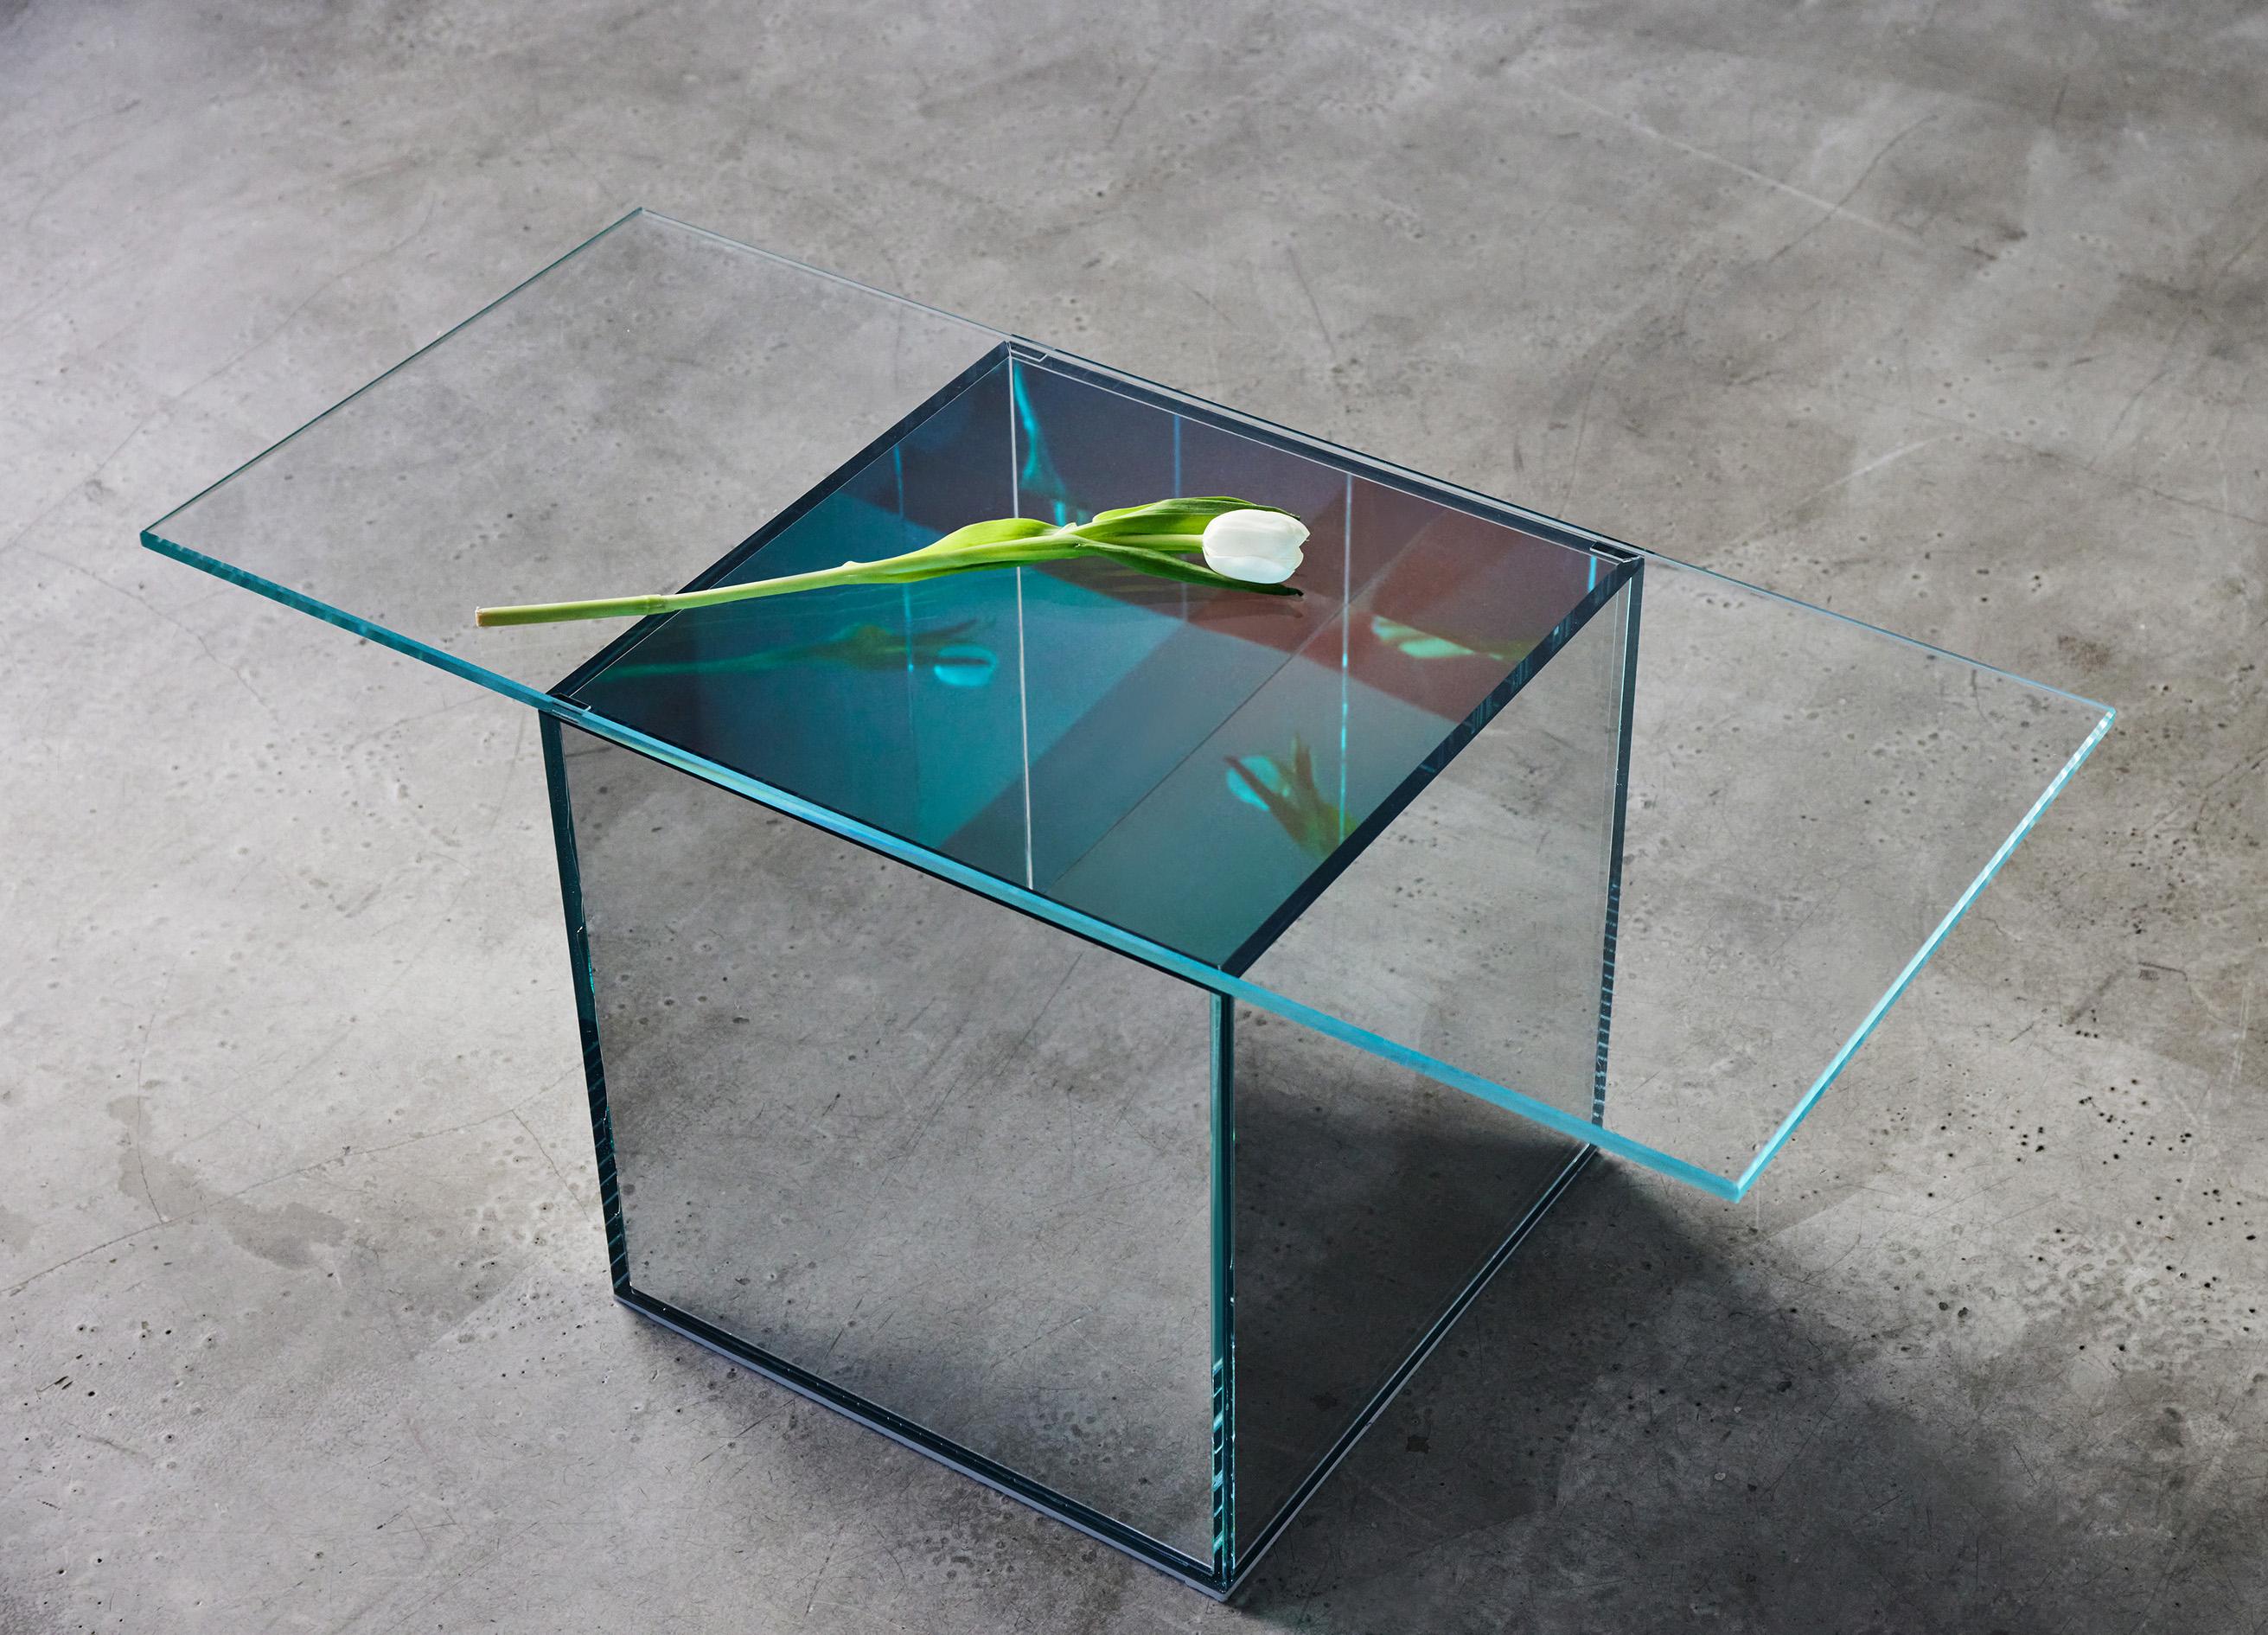 VIEW Coffee Table is part of a five-piece collection of sculptural glass and mirror furniture seeking to bring interactive views into objects and furniture. VIEW Coffee Table is made from ultra-clear low-iron glass and mirrored glass base. While